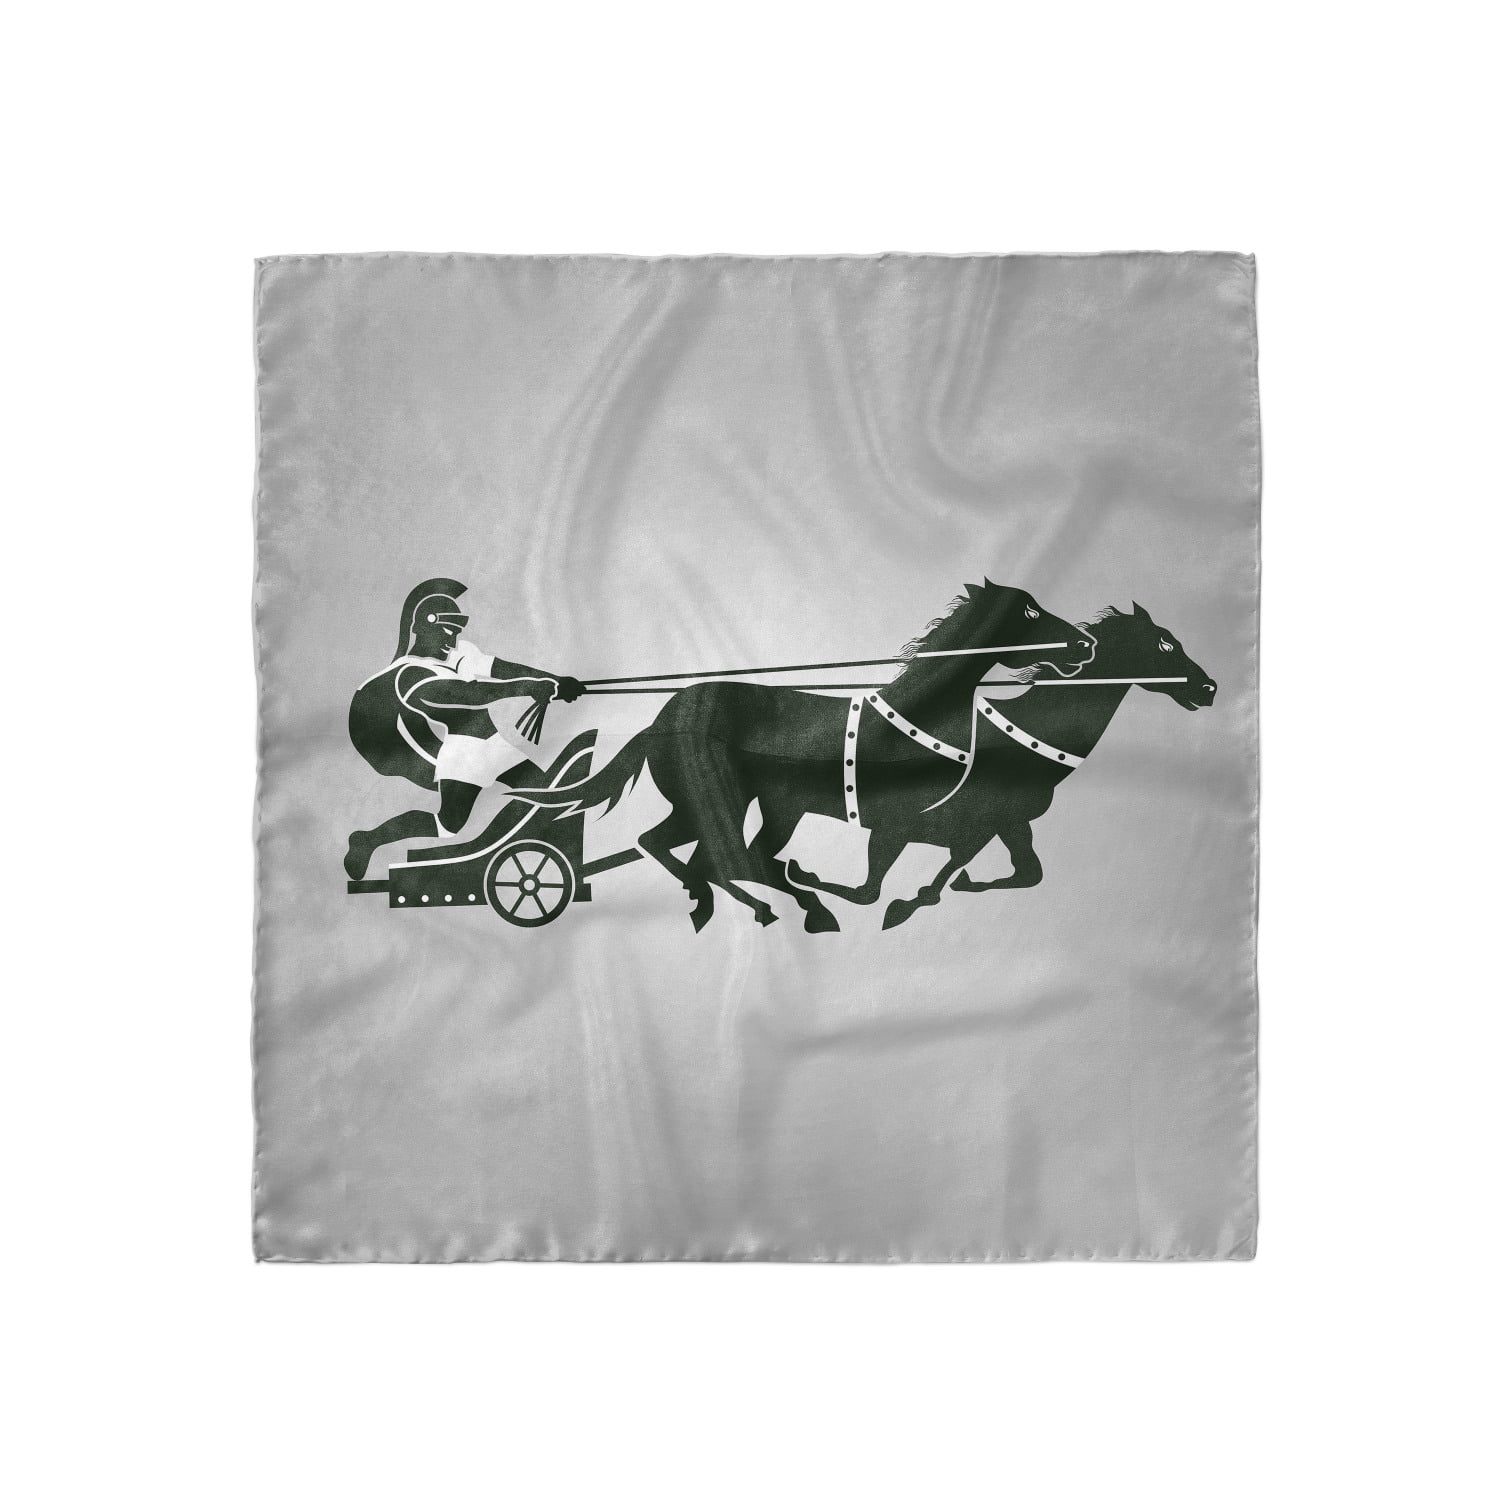 Chariot Retro Place Mats Set of 4 Warrior in a Chariot 